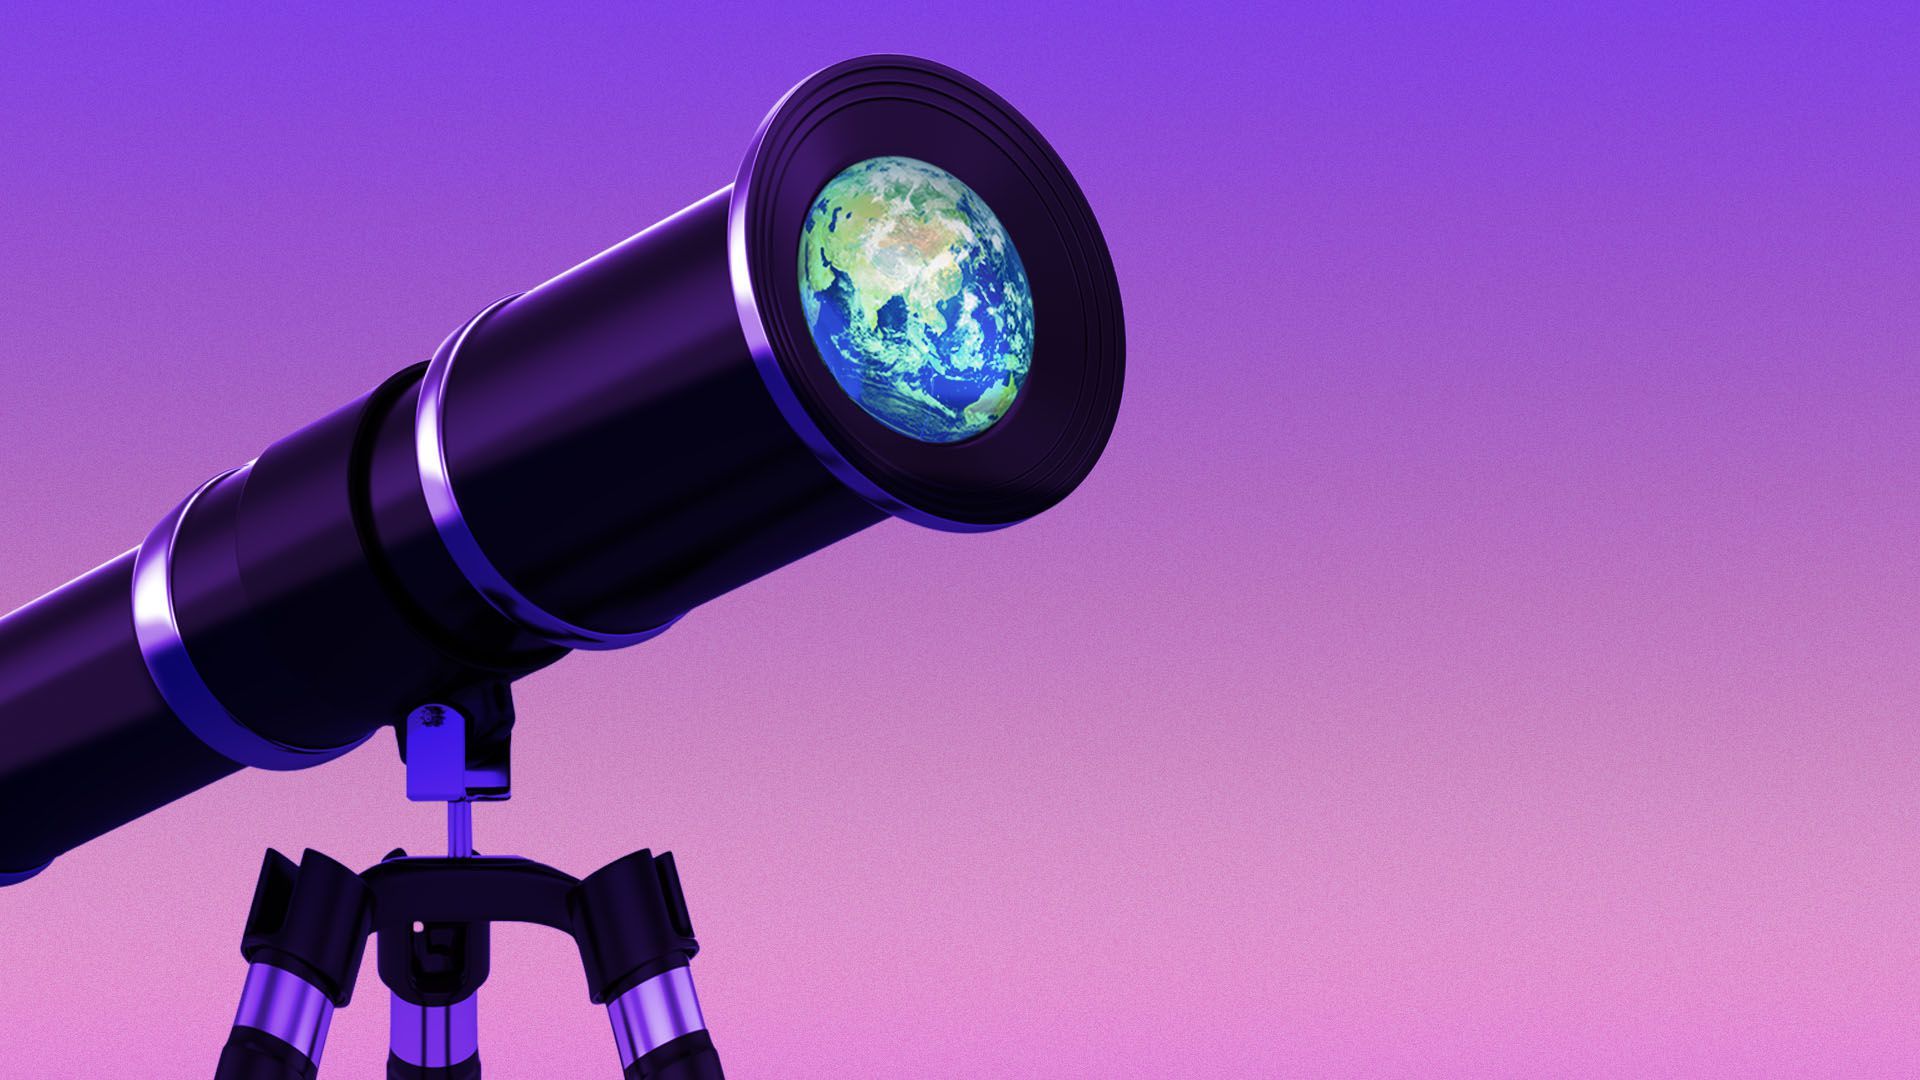 Illustration of a telescope reflecting the earth